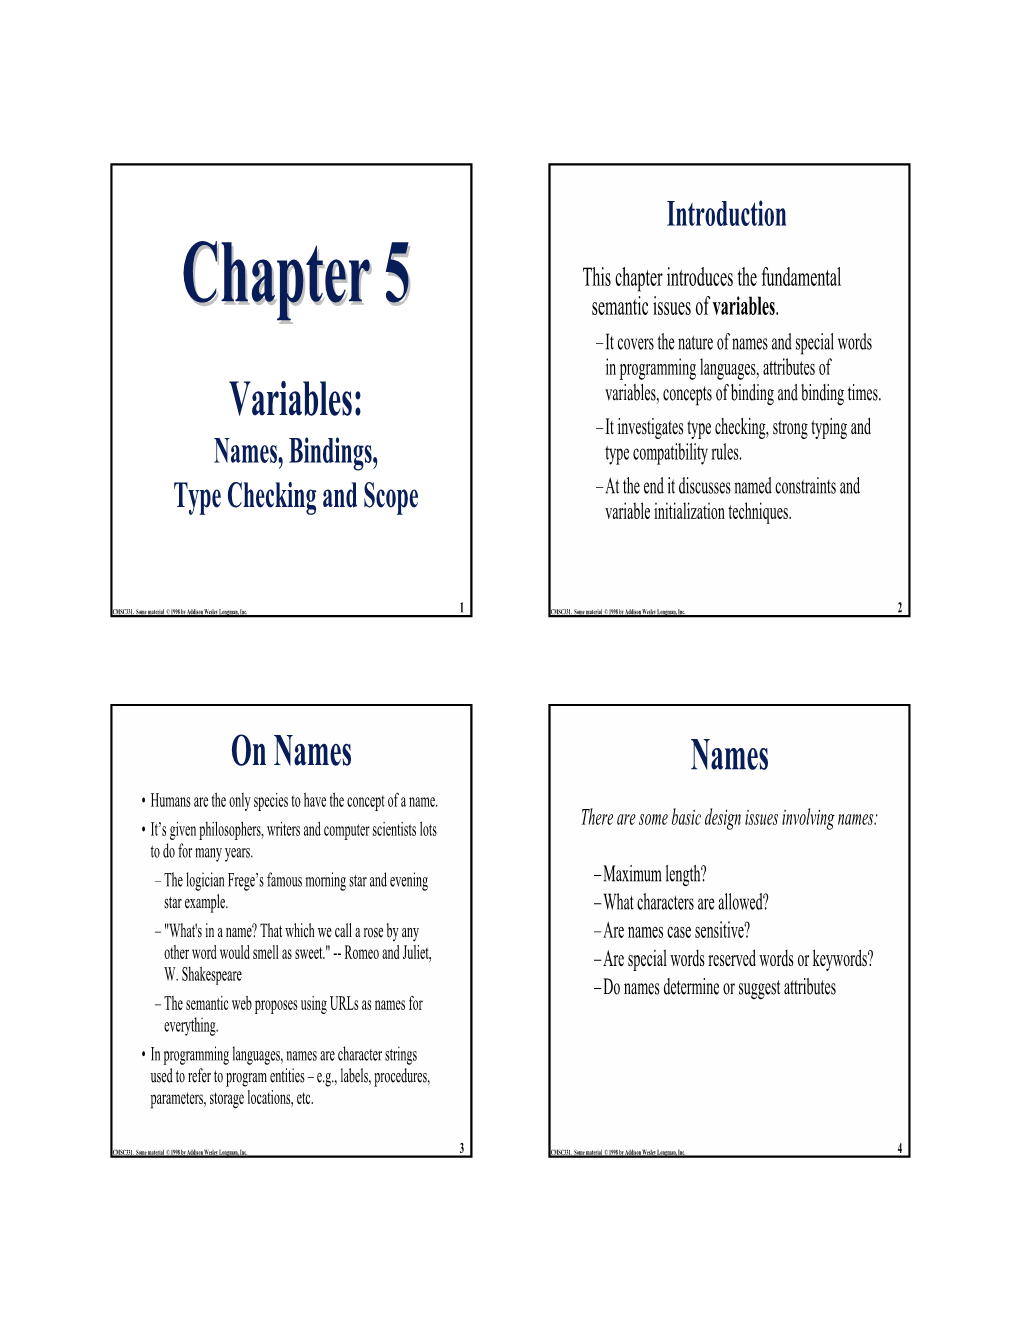 Chapter 55 Semantic Issues of Variables